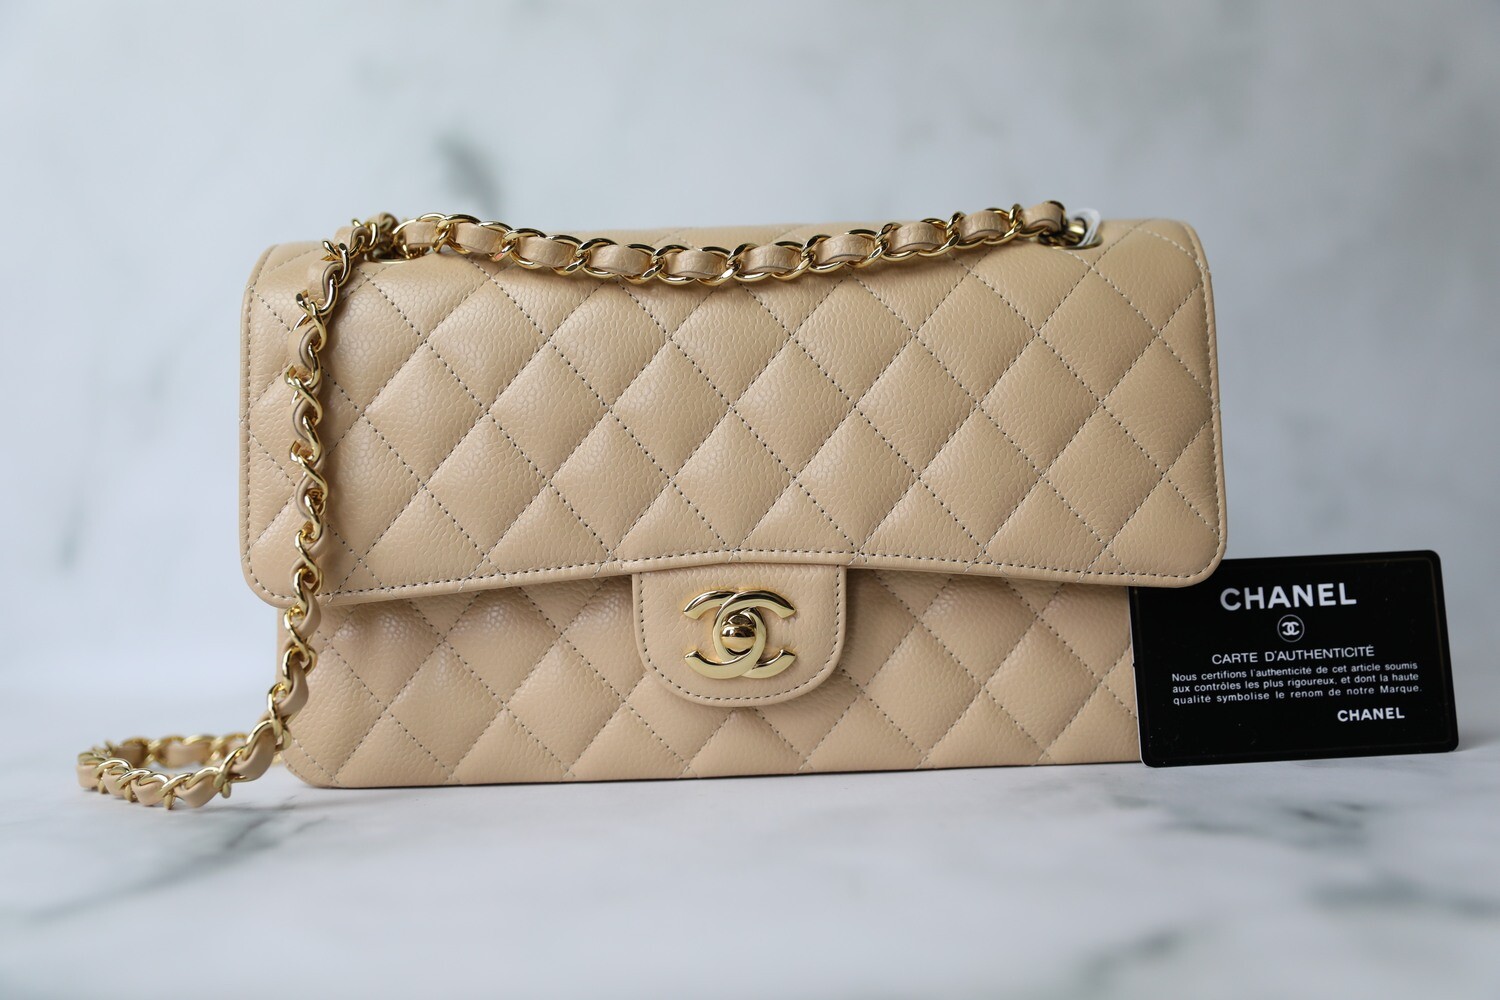 Chanel Classic Medium, Beige Clair Caviar with Gold Hardware, New in Box